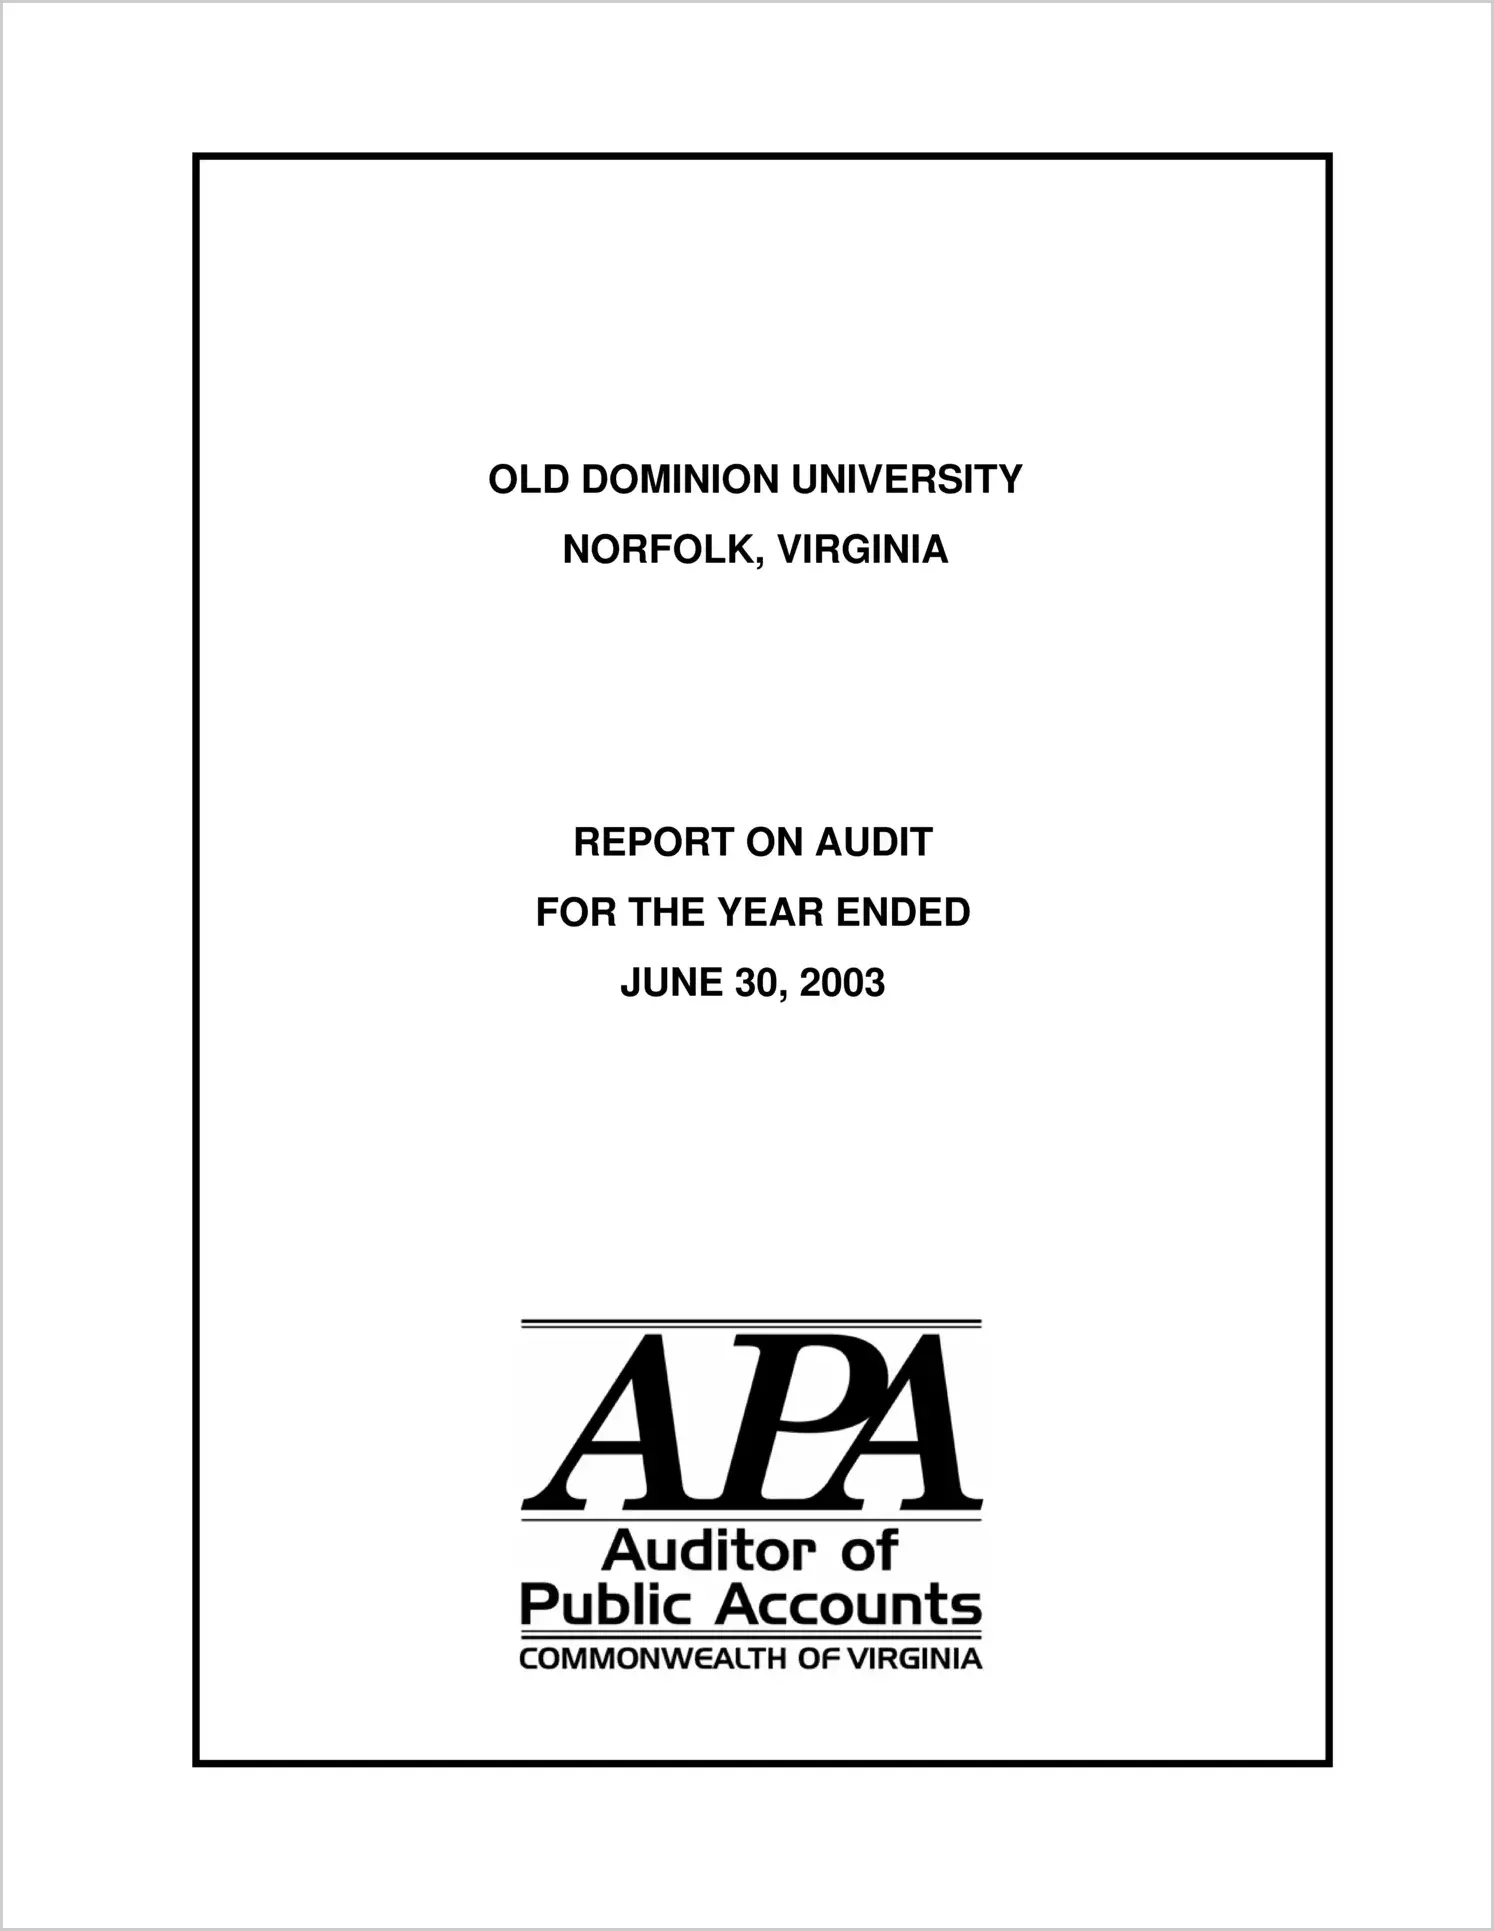 Old Dominion University for the year ended June 30, 2003